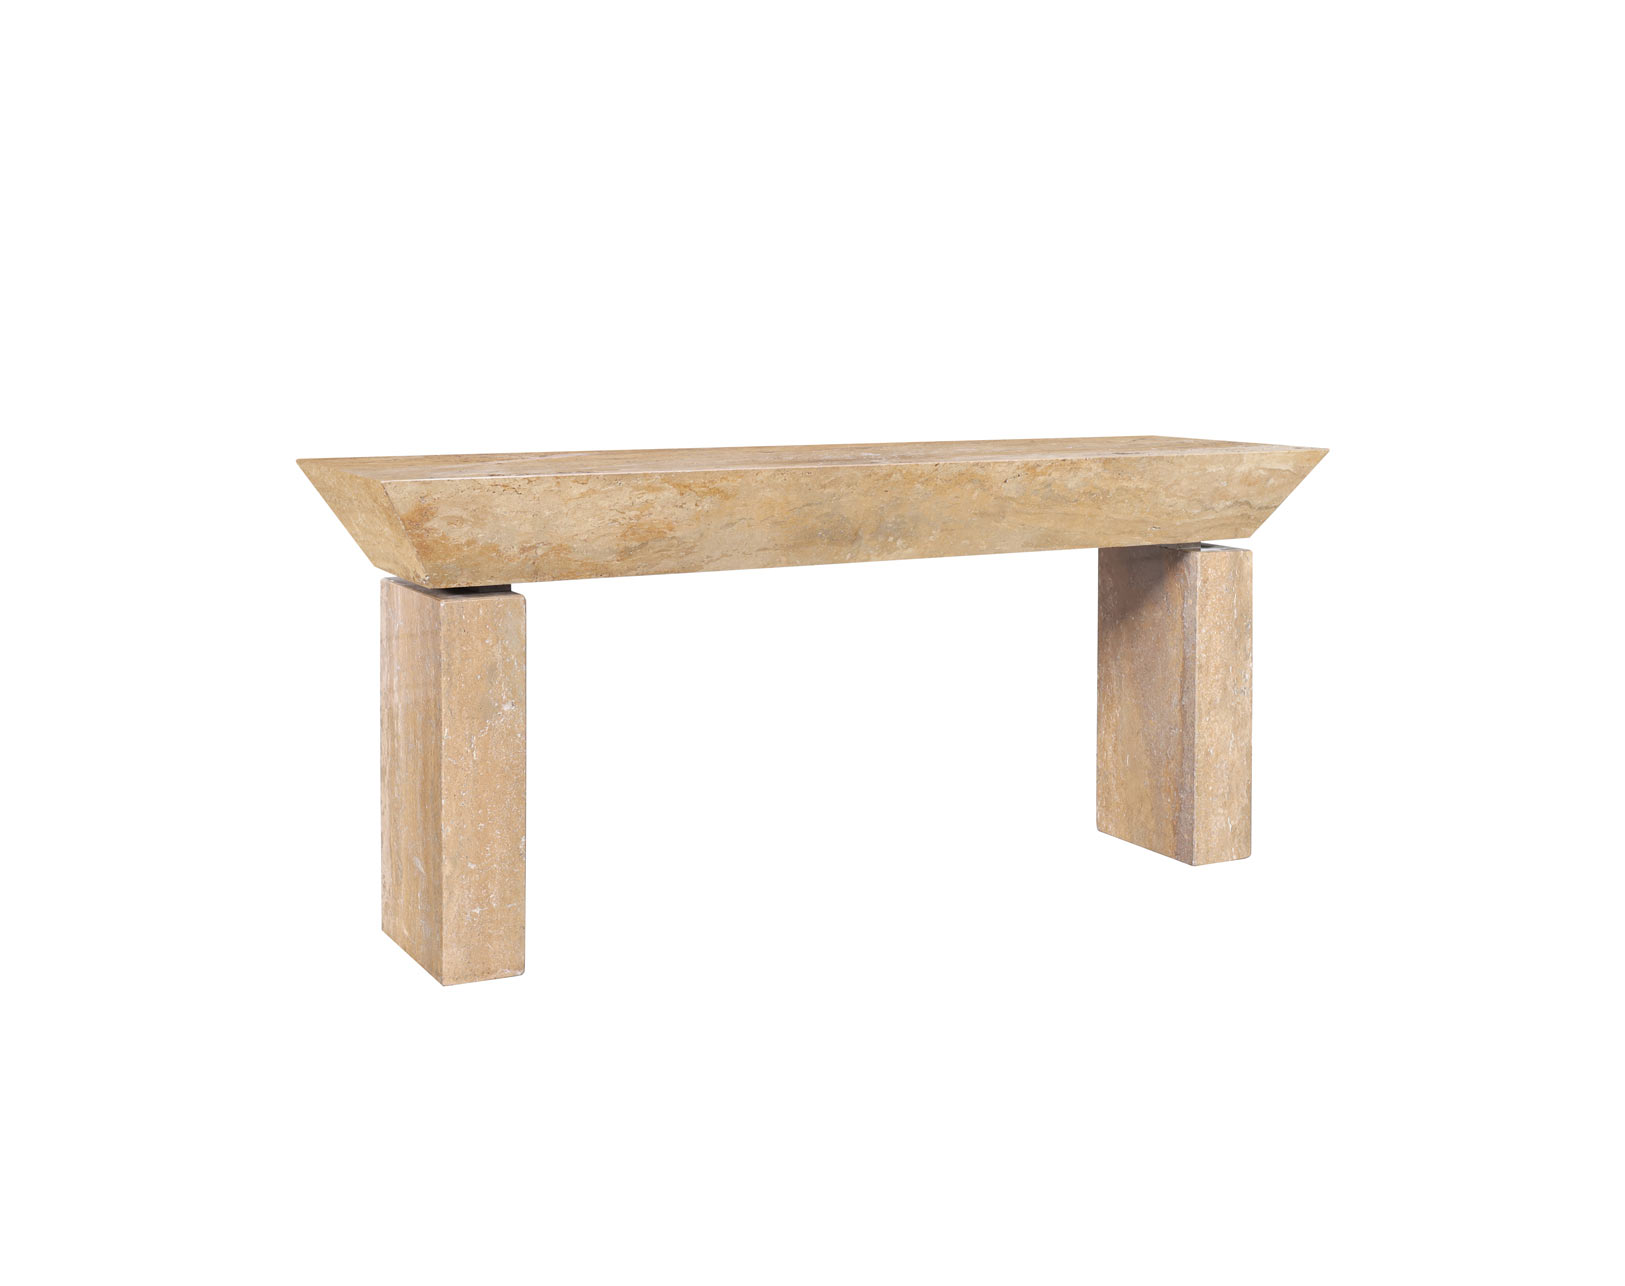 Monumental Italian Travertine Console Table, 2 Available